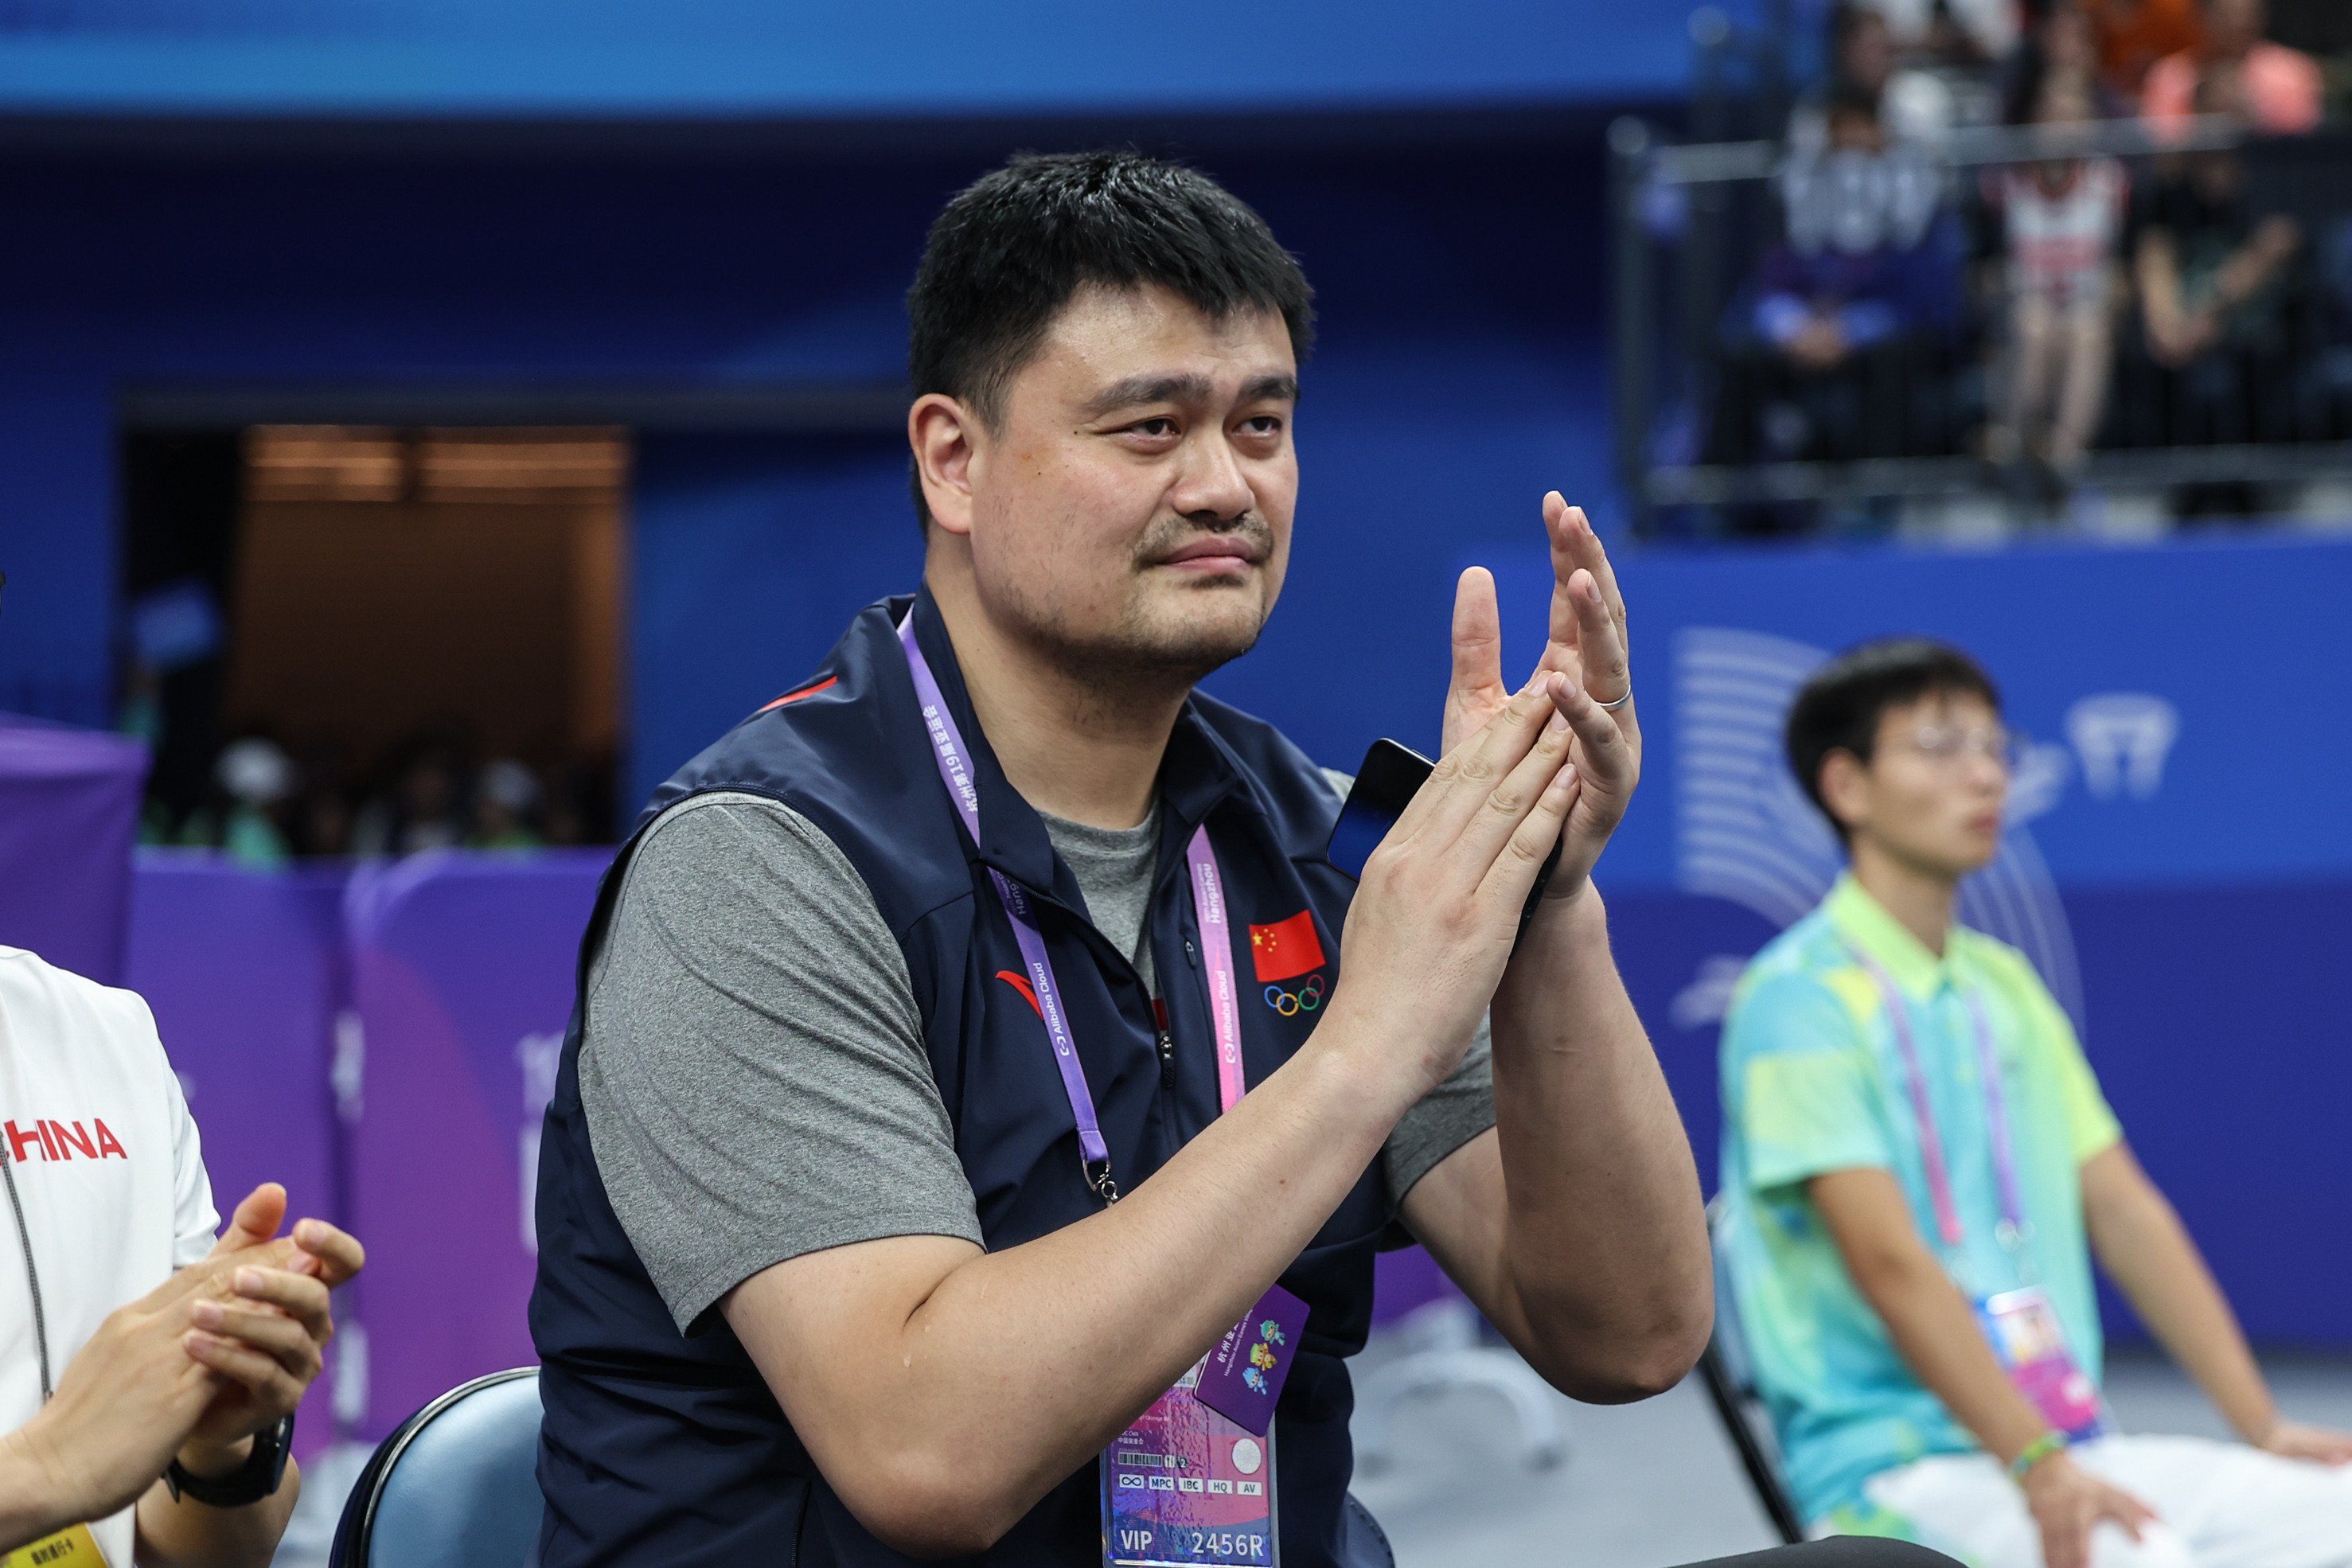 Chinese Basketball Association president Yao Ming watches the men’s Group B match between China and Chinese Taipei at the 19th Asian Games in Hangzhou. Photo: Xinhua